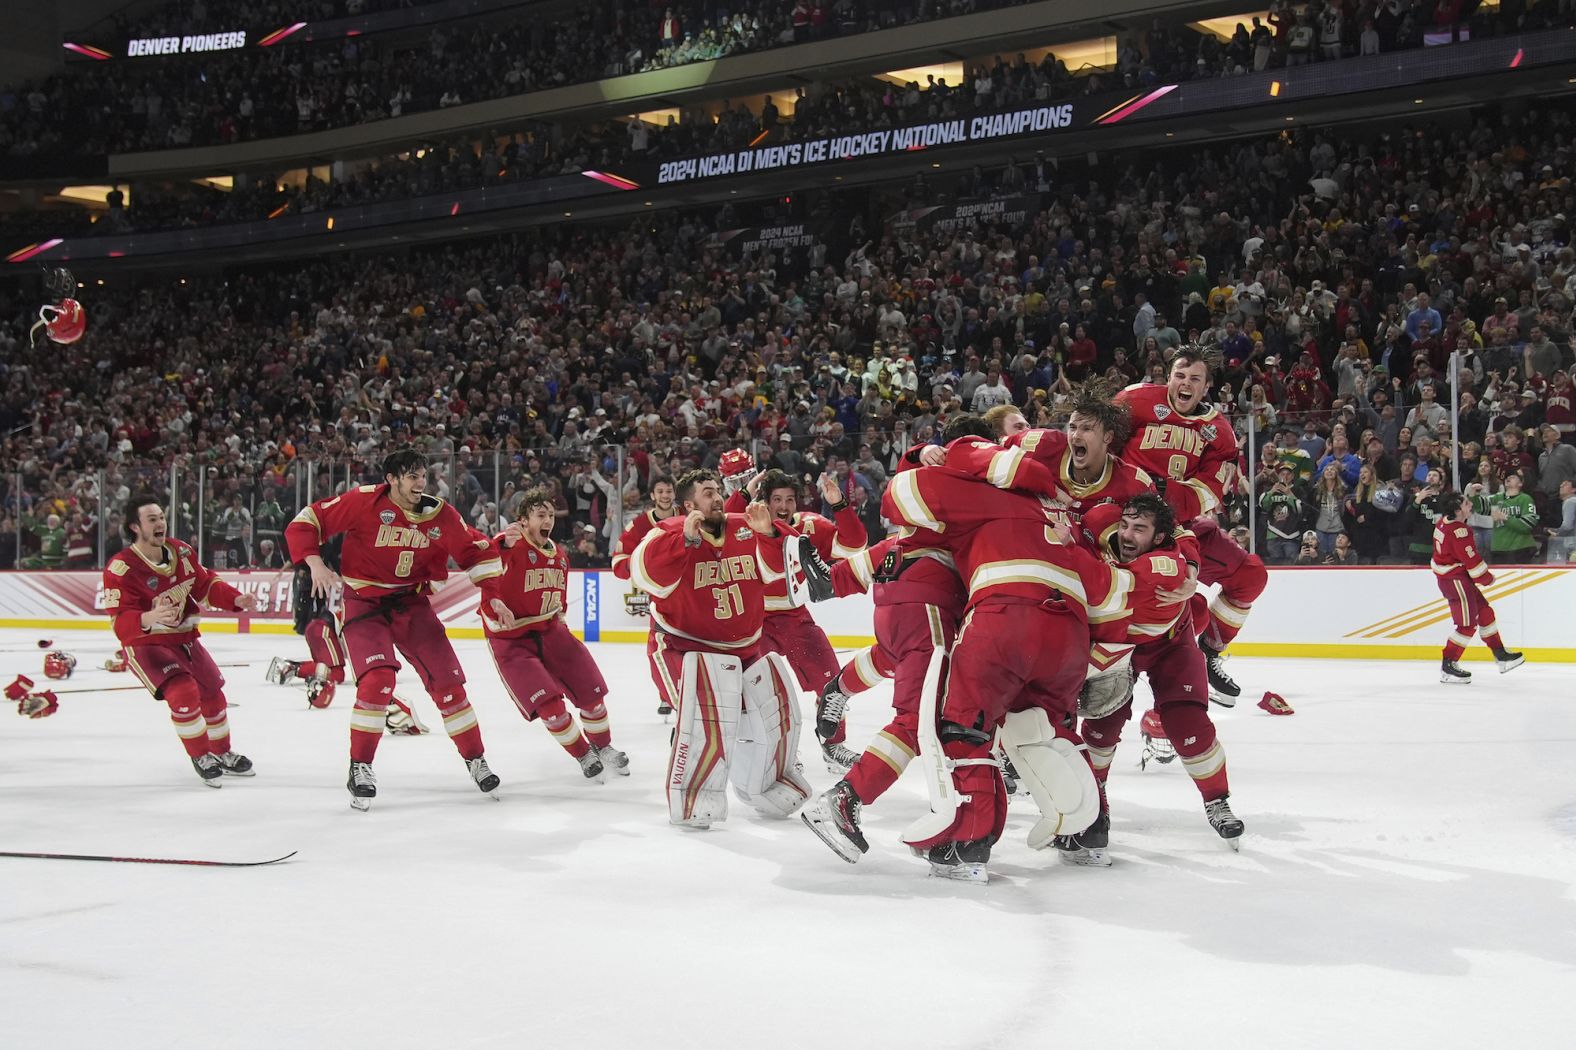 Denver celebrates after defeating Boston College in the championship game of the men's NCAA college hockey tournament in St. Paul, Minnesota, on Saturday, April 13.